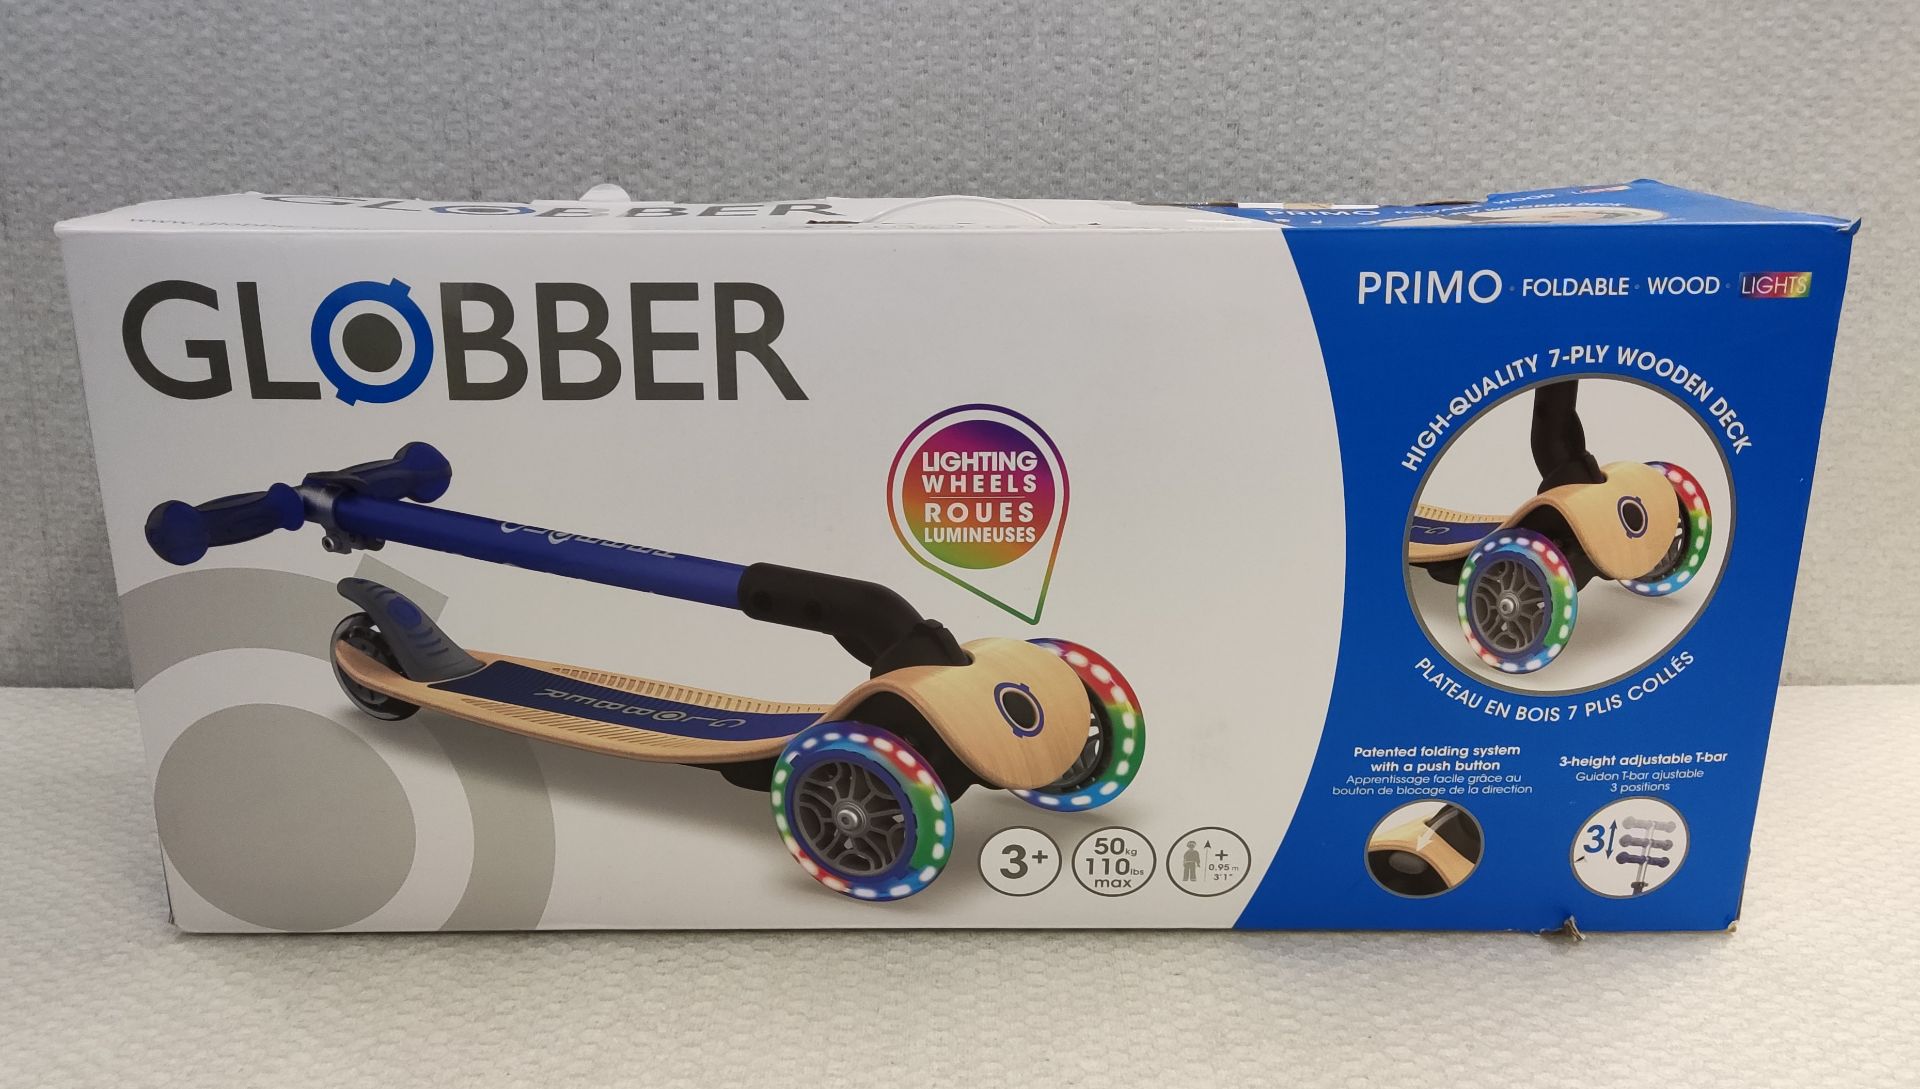 1 x Globber Primo Foldable Wooden Deck Scooter - READ DESCRIPTION - Image 10 of 10